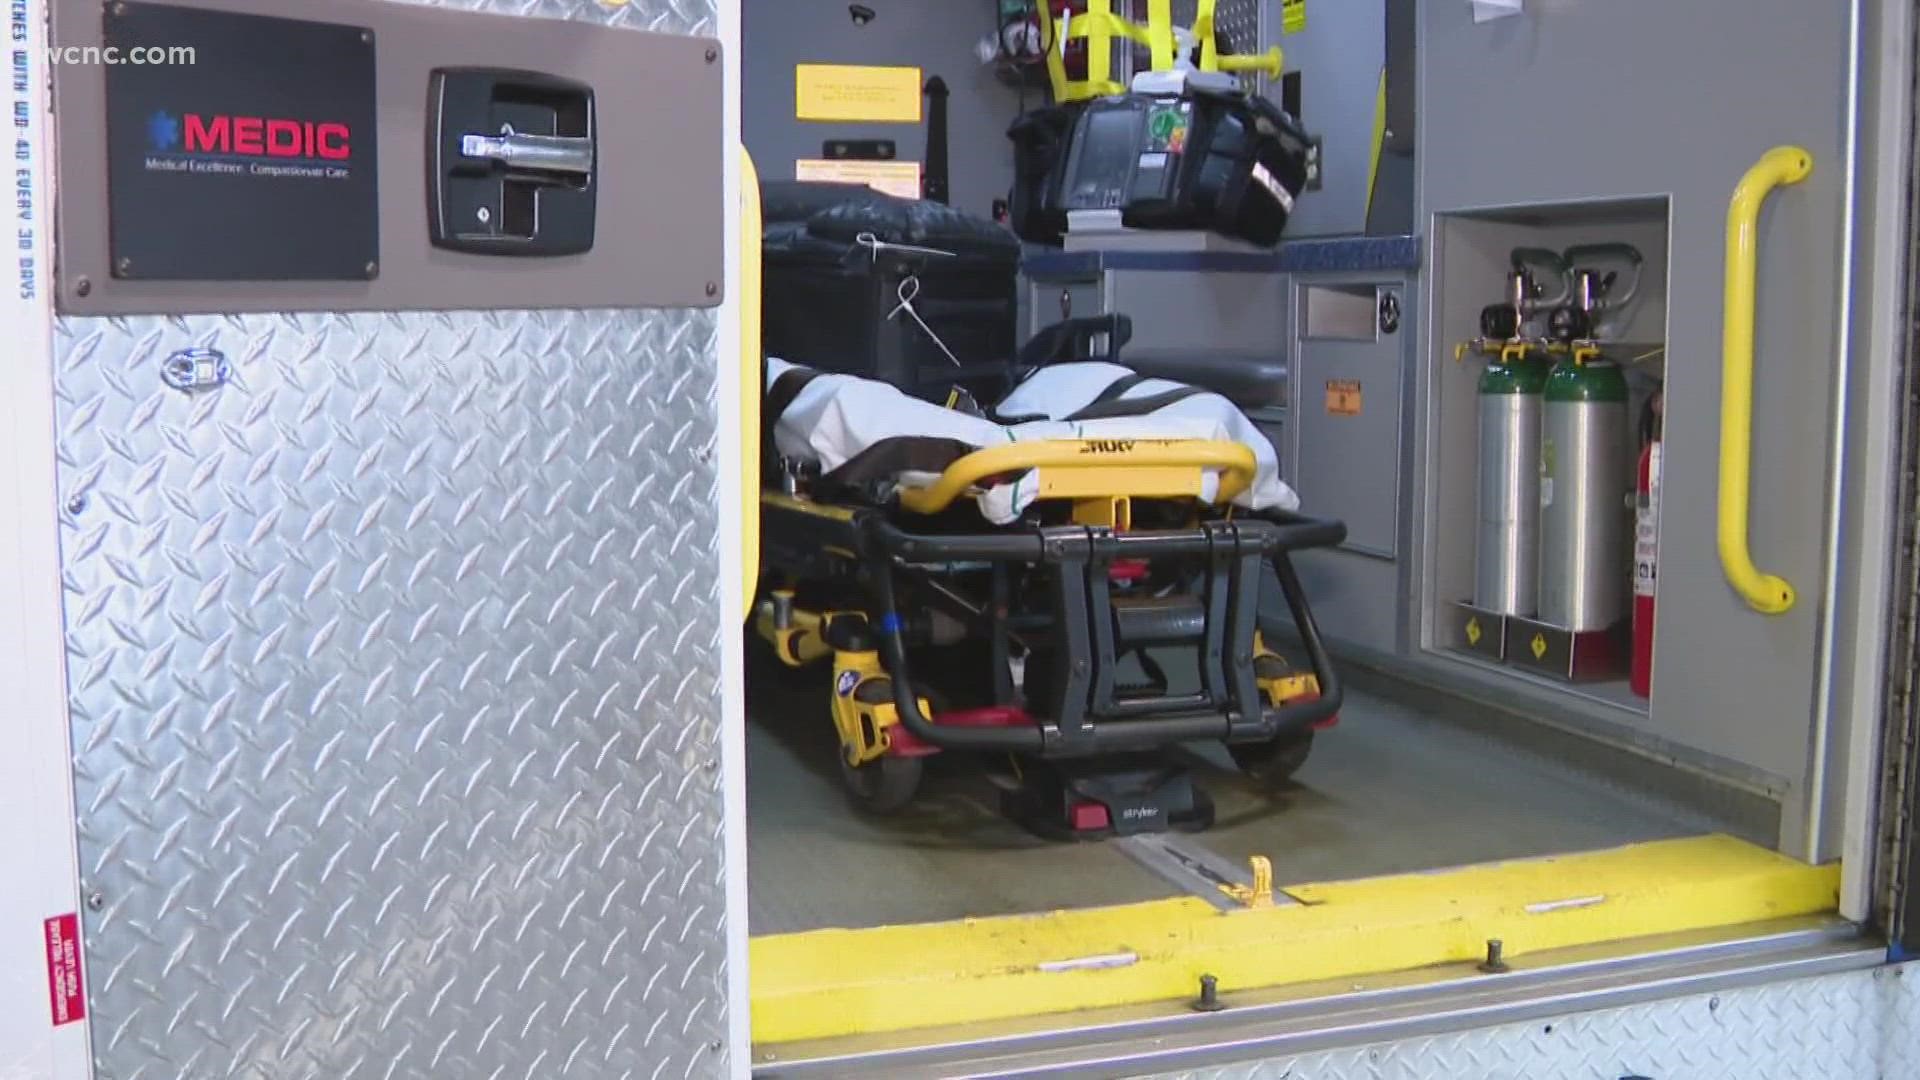 A staffing shortage is why the largest EMS agency in North Carolina says it's changing how it responds to 9-1-1 calls in Mecklenburg County